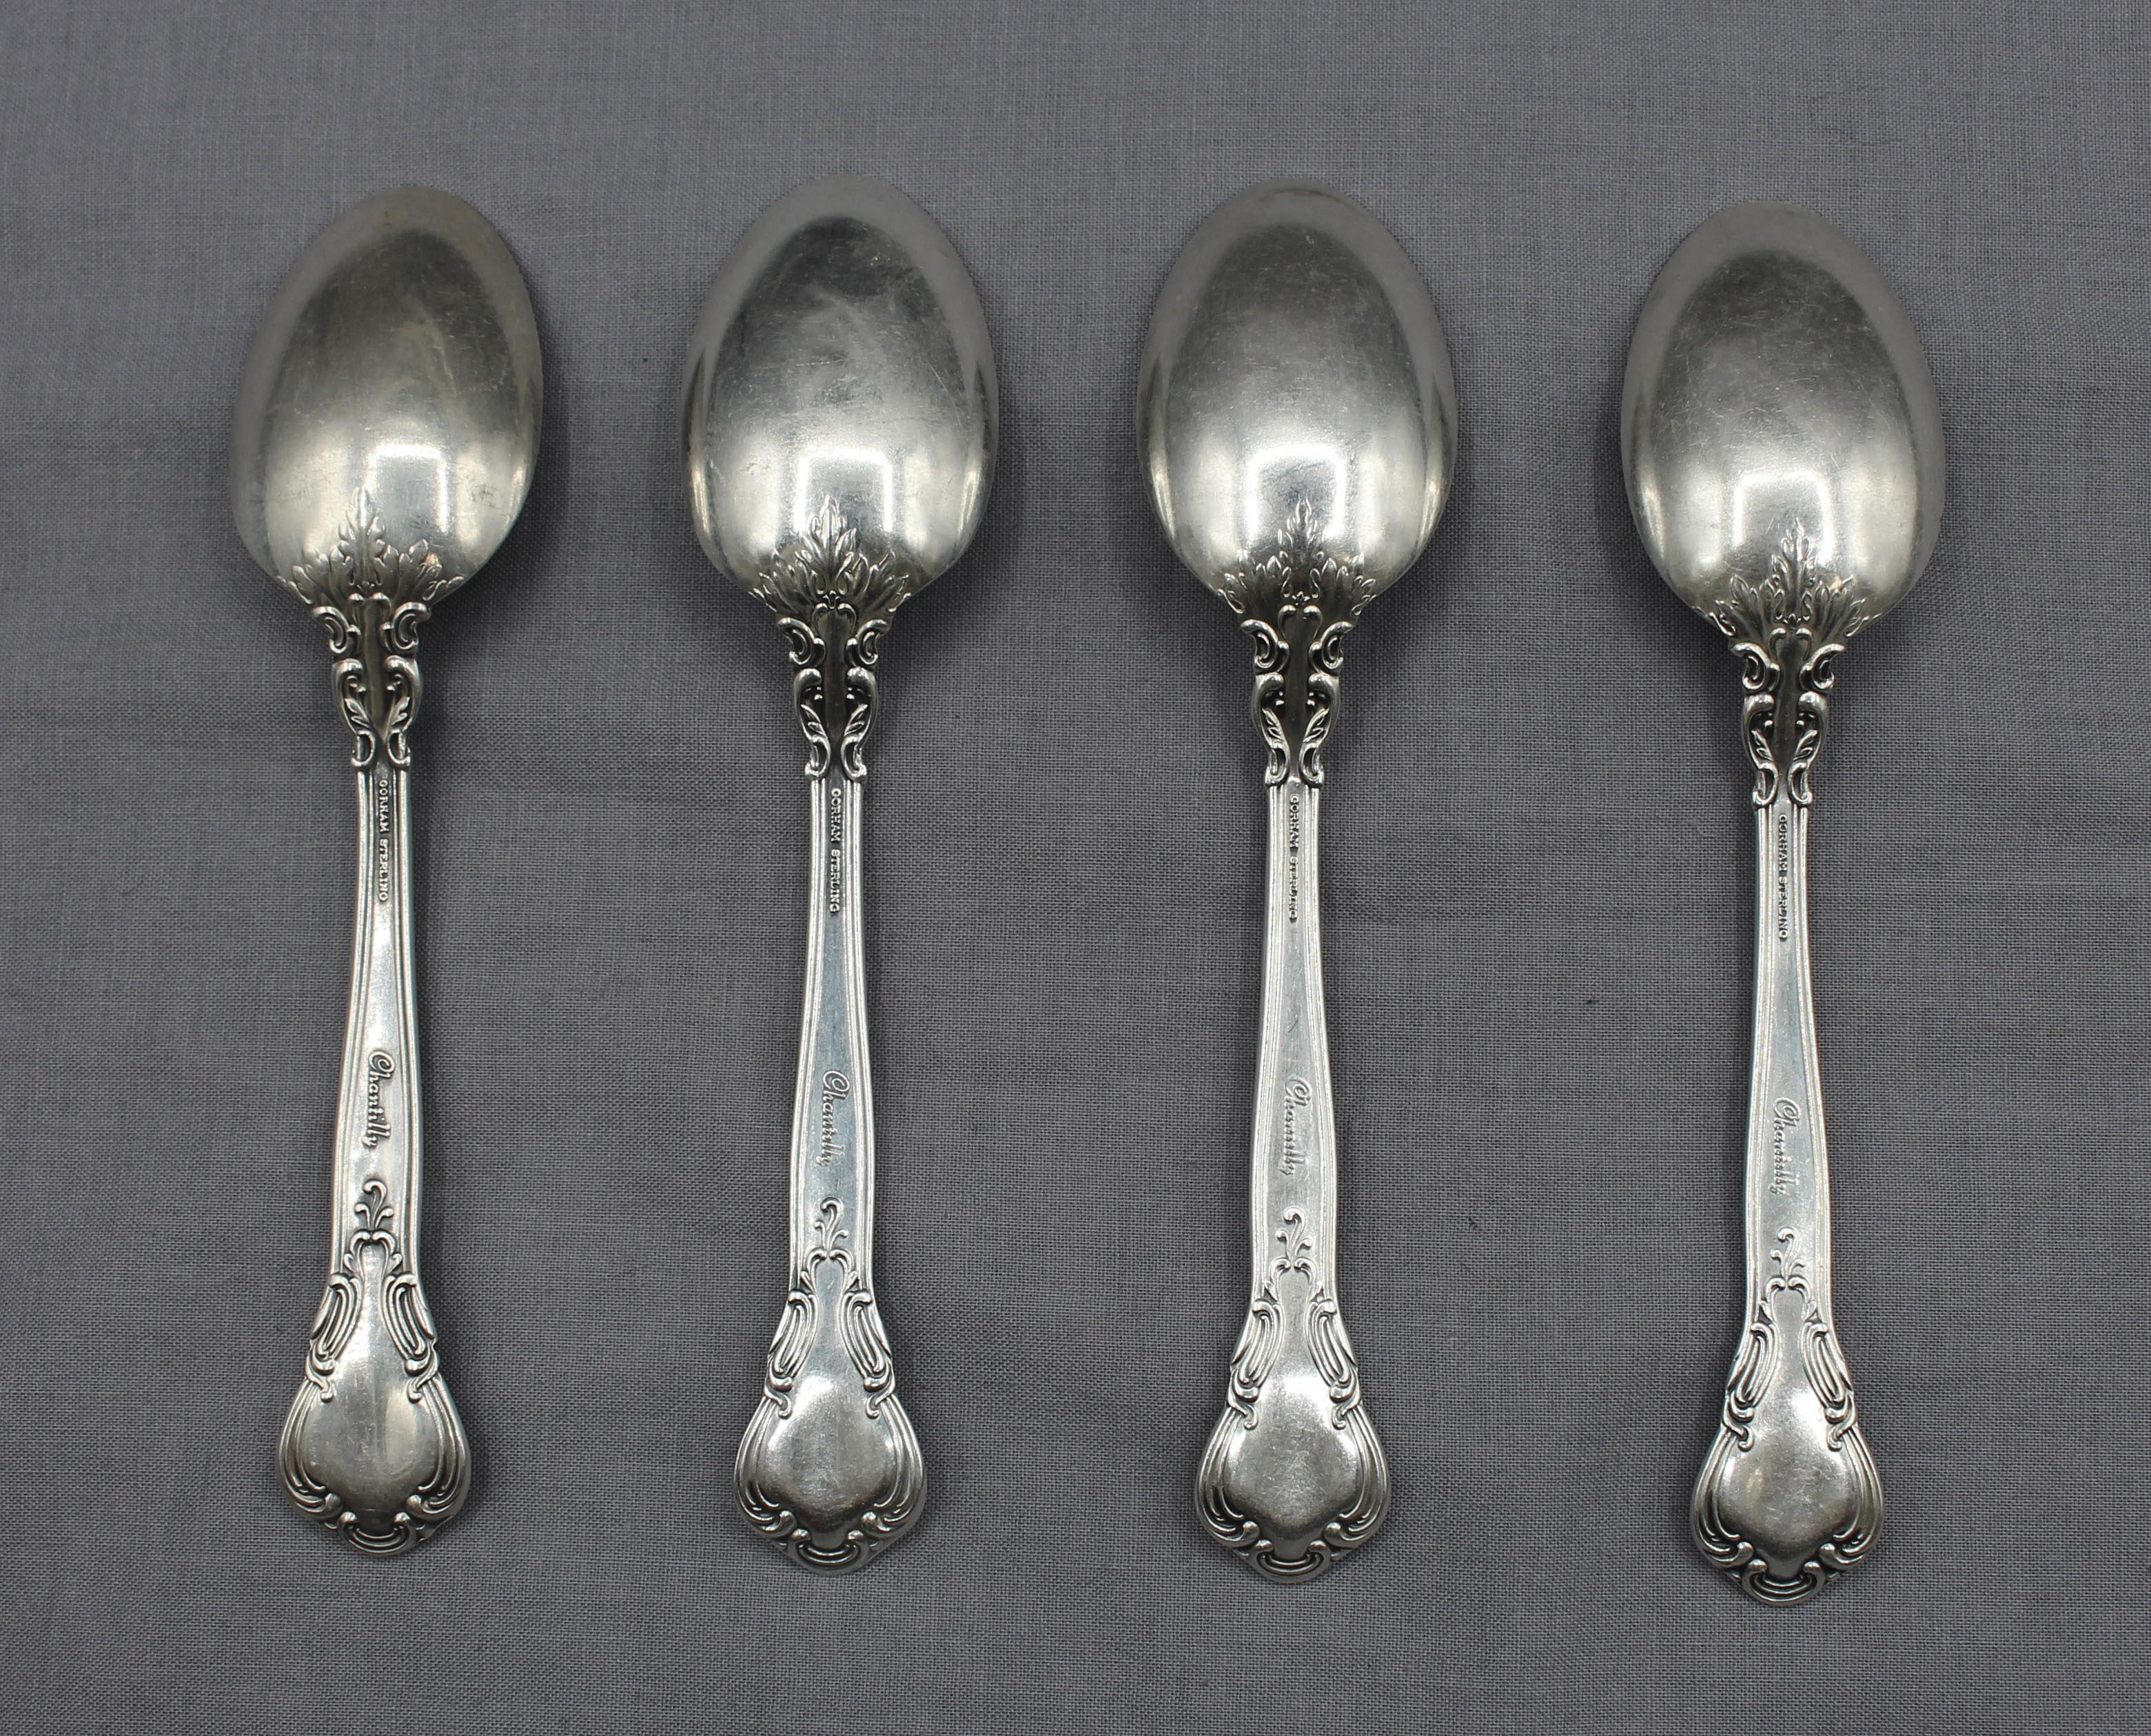 Set of 4 Chantilly sterling silver teaspoons by Gorham, c.1970s. Modern & heavy. Marked Gorham, Sterling, Chantilly. Never monogramed. 3.95 troy oz.
5.75